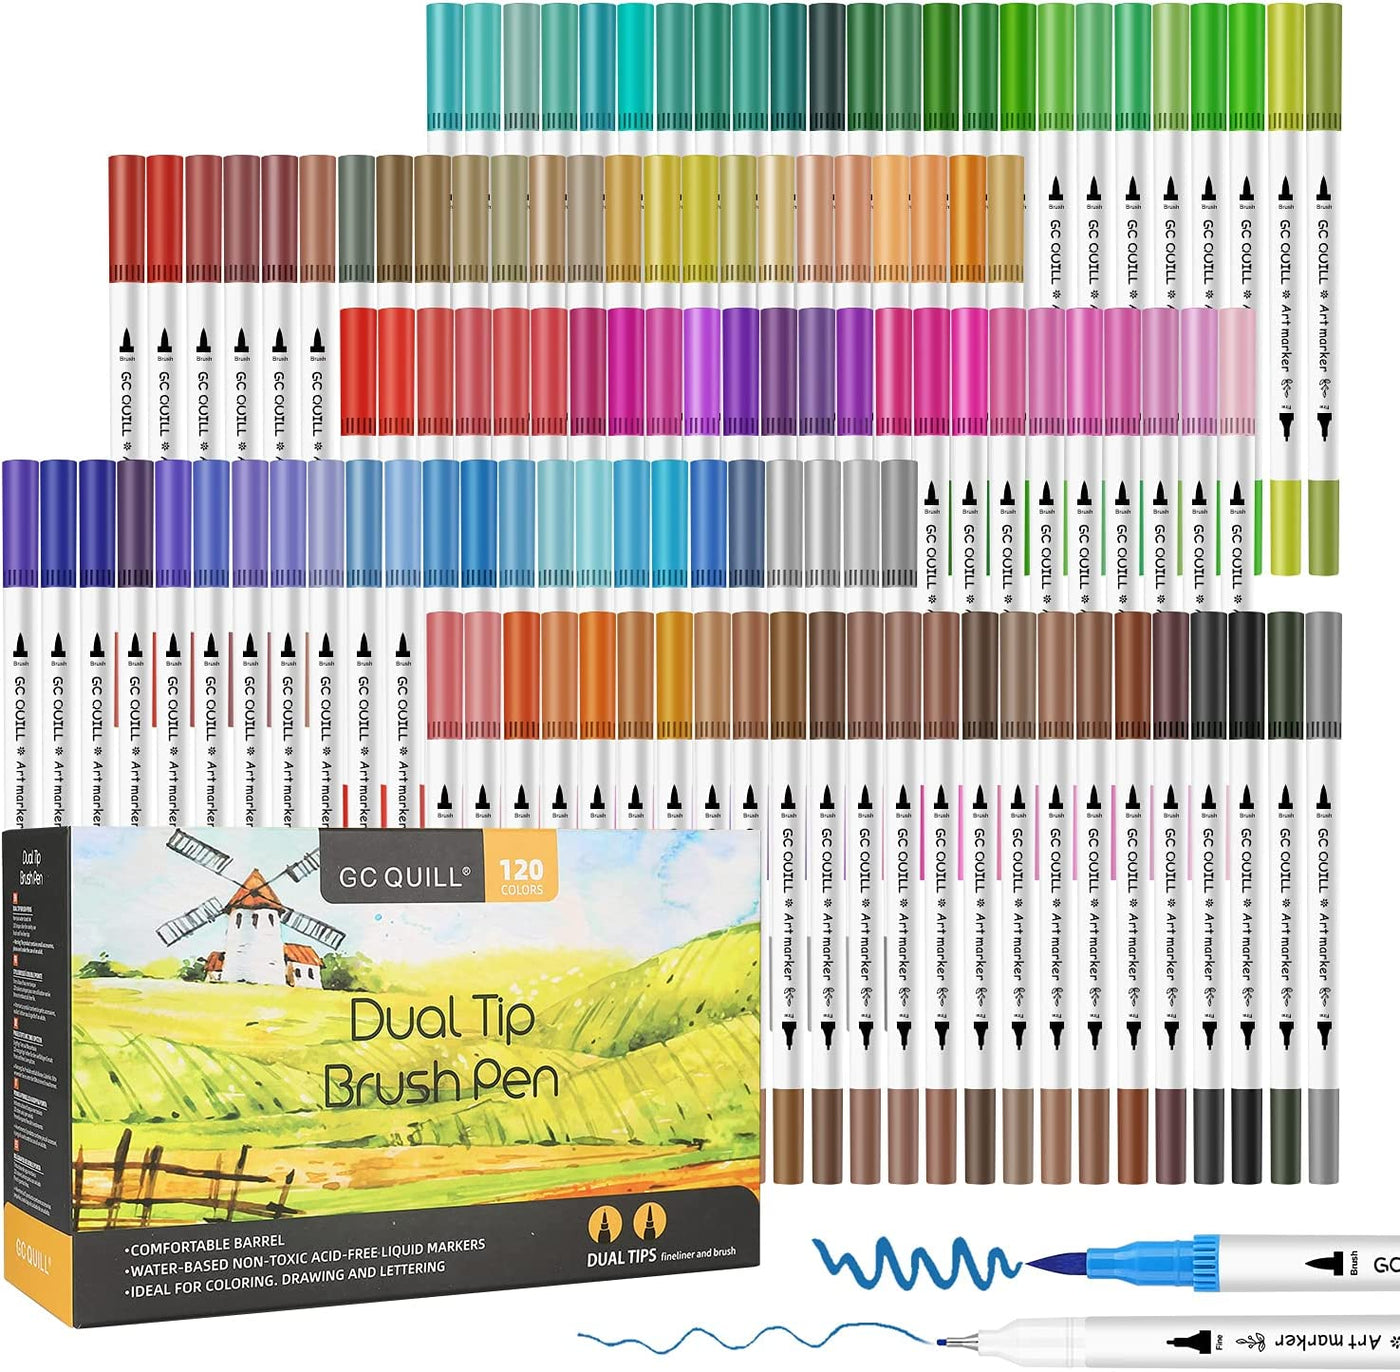 Buy Dual Tip Coloring Markers for Adult Coloring Books - 12 Colors